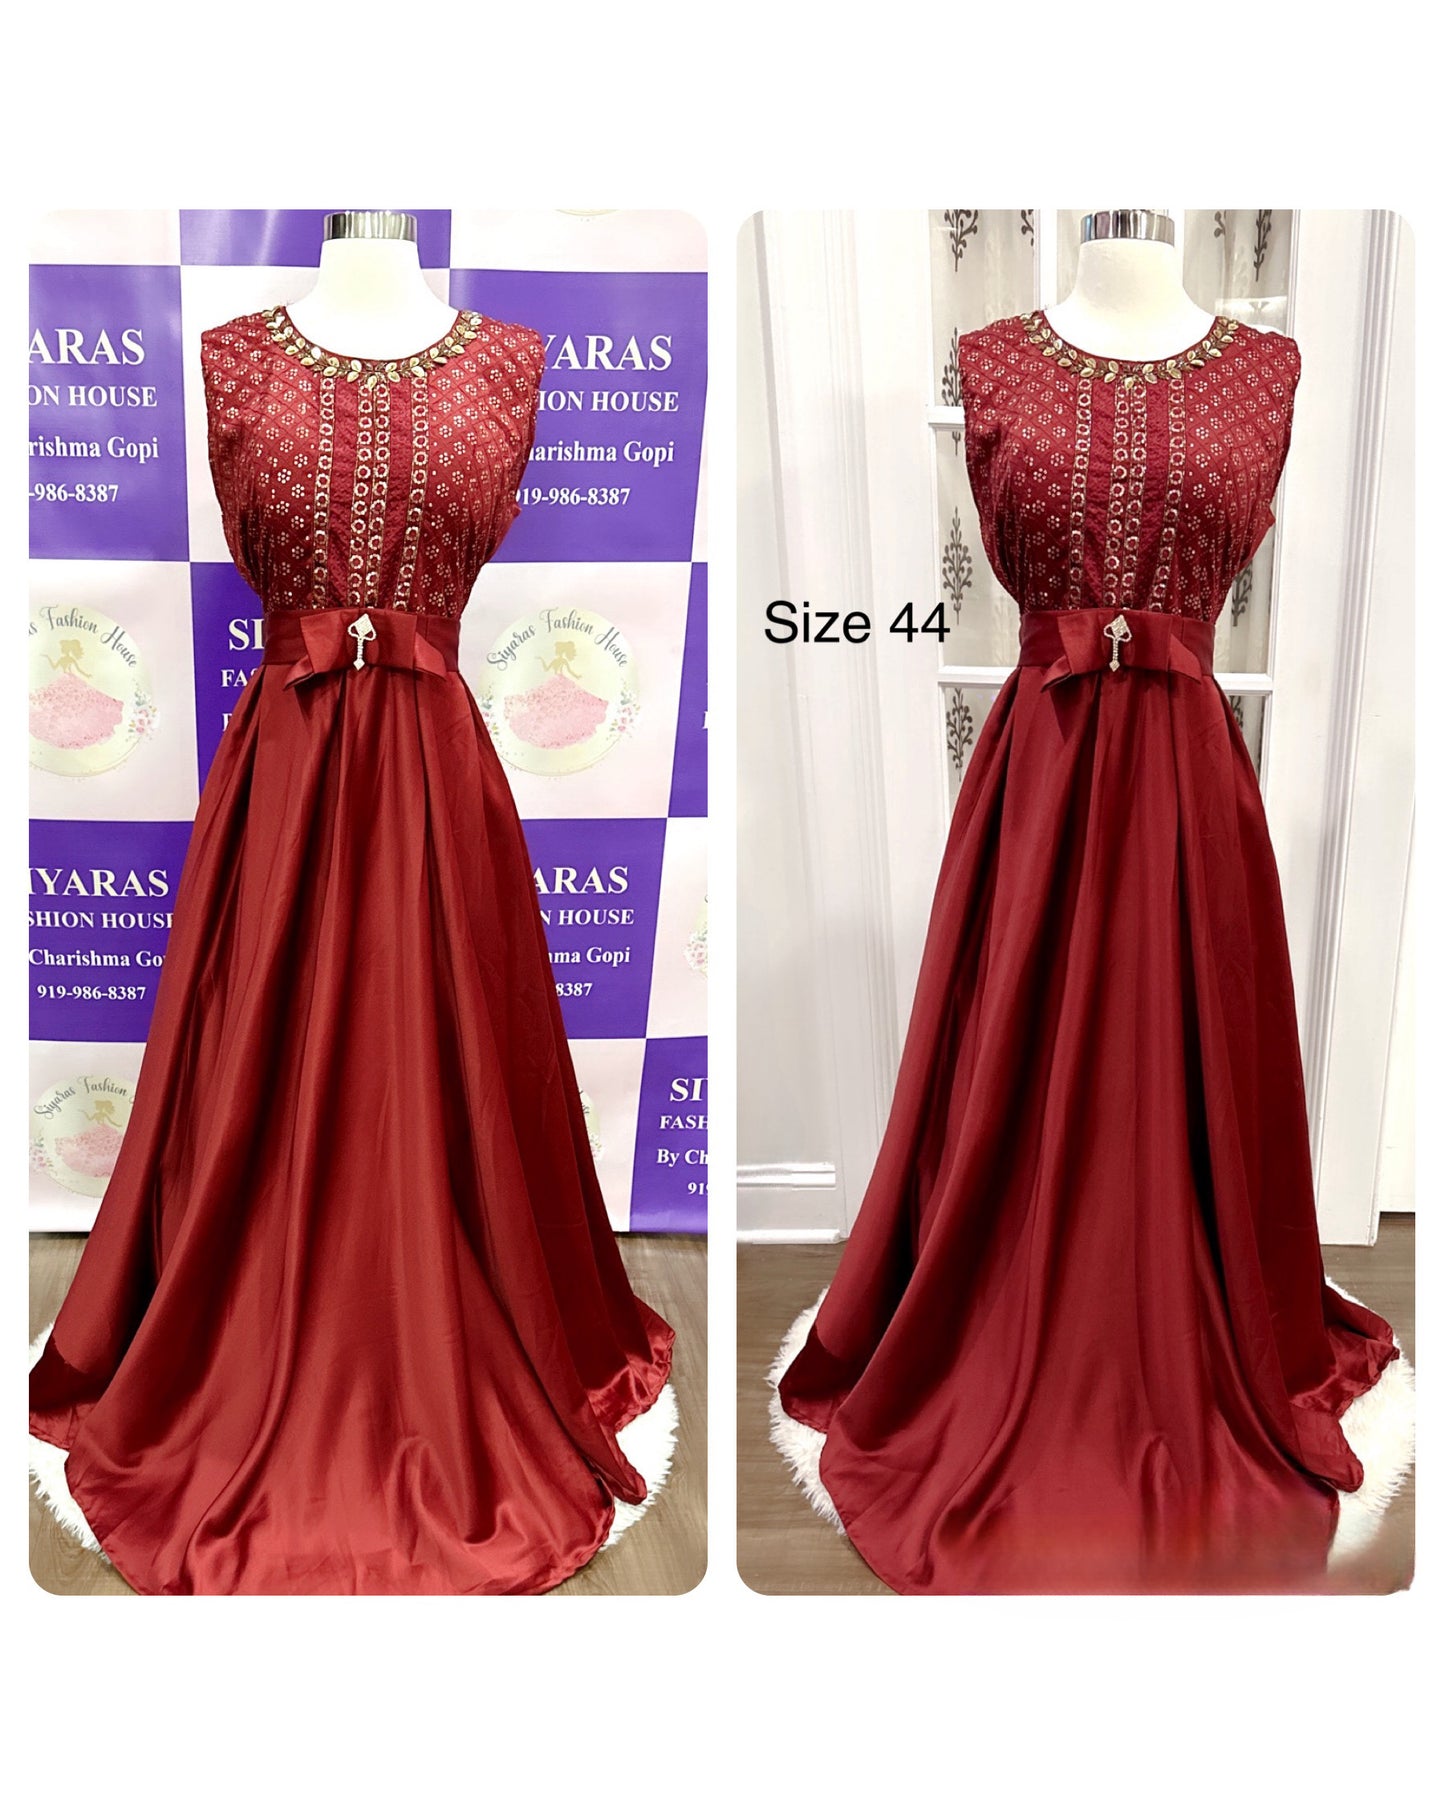 Garnet luxury Satin Gown with delicate sequin embroidery floor length gown size 44